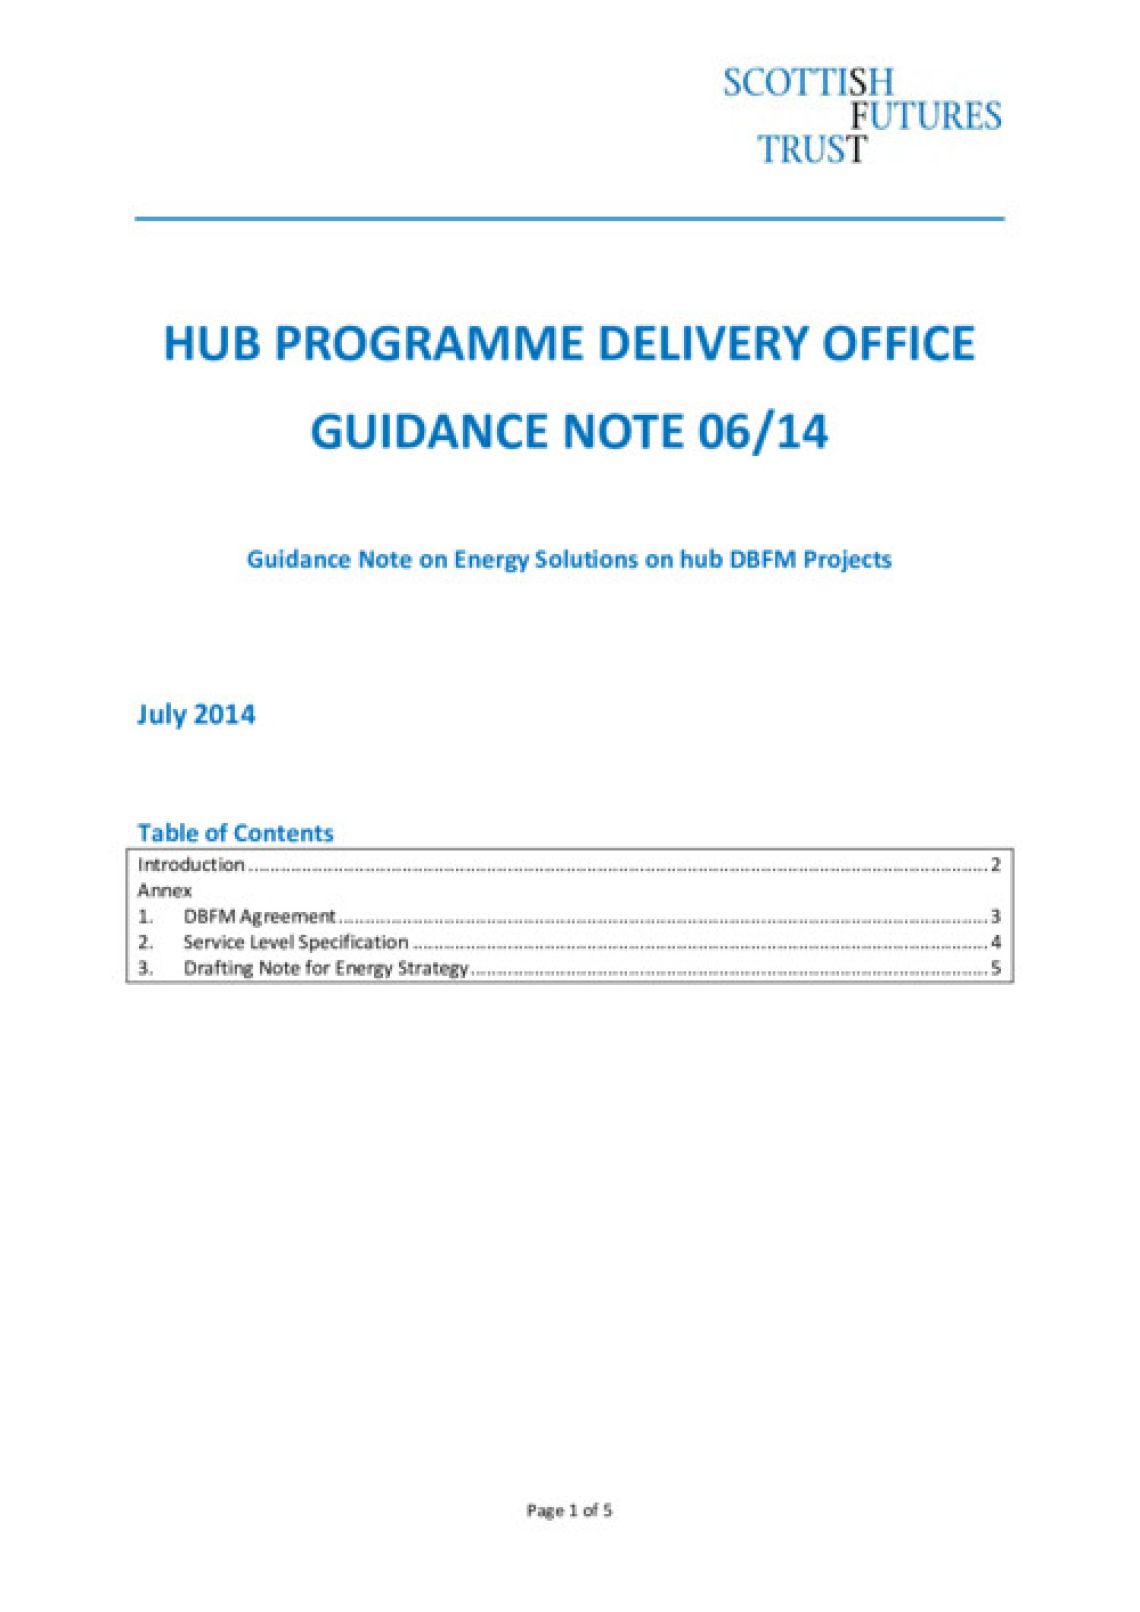 Energy Strategy Guidance Note on hub DBFM projects cover